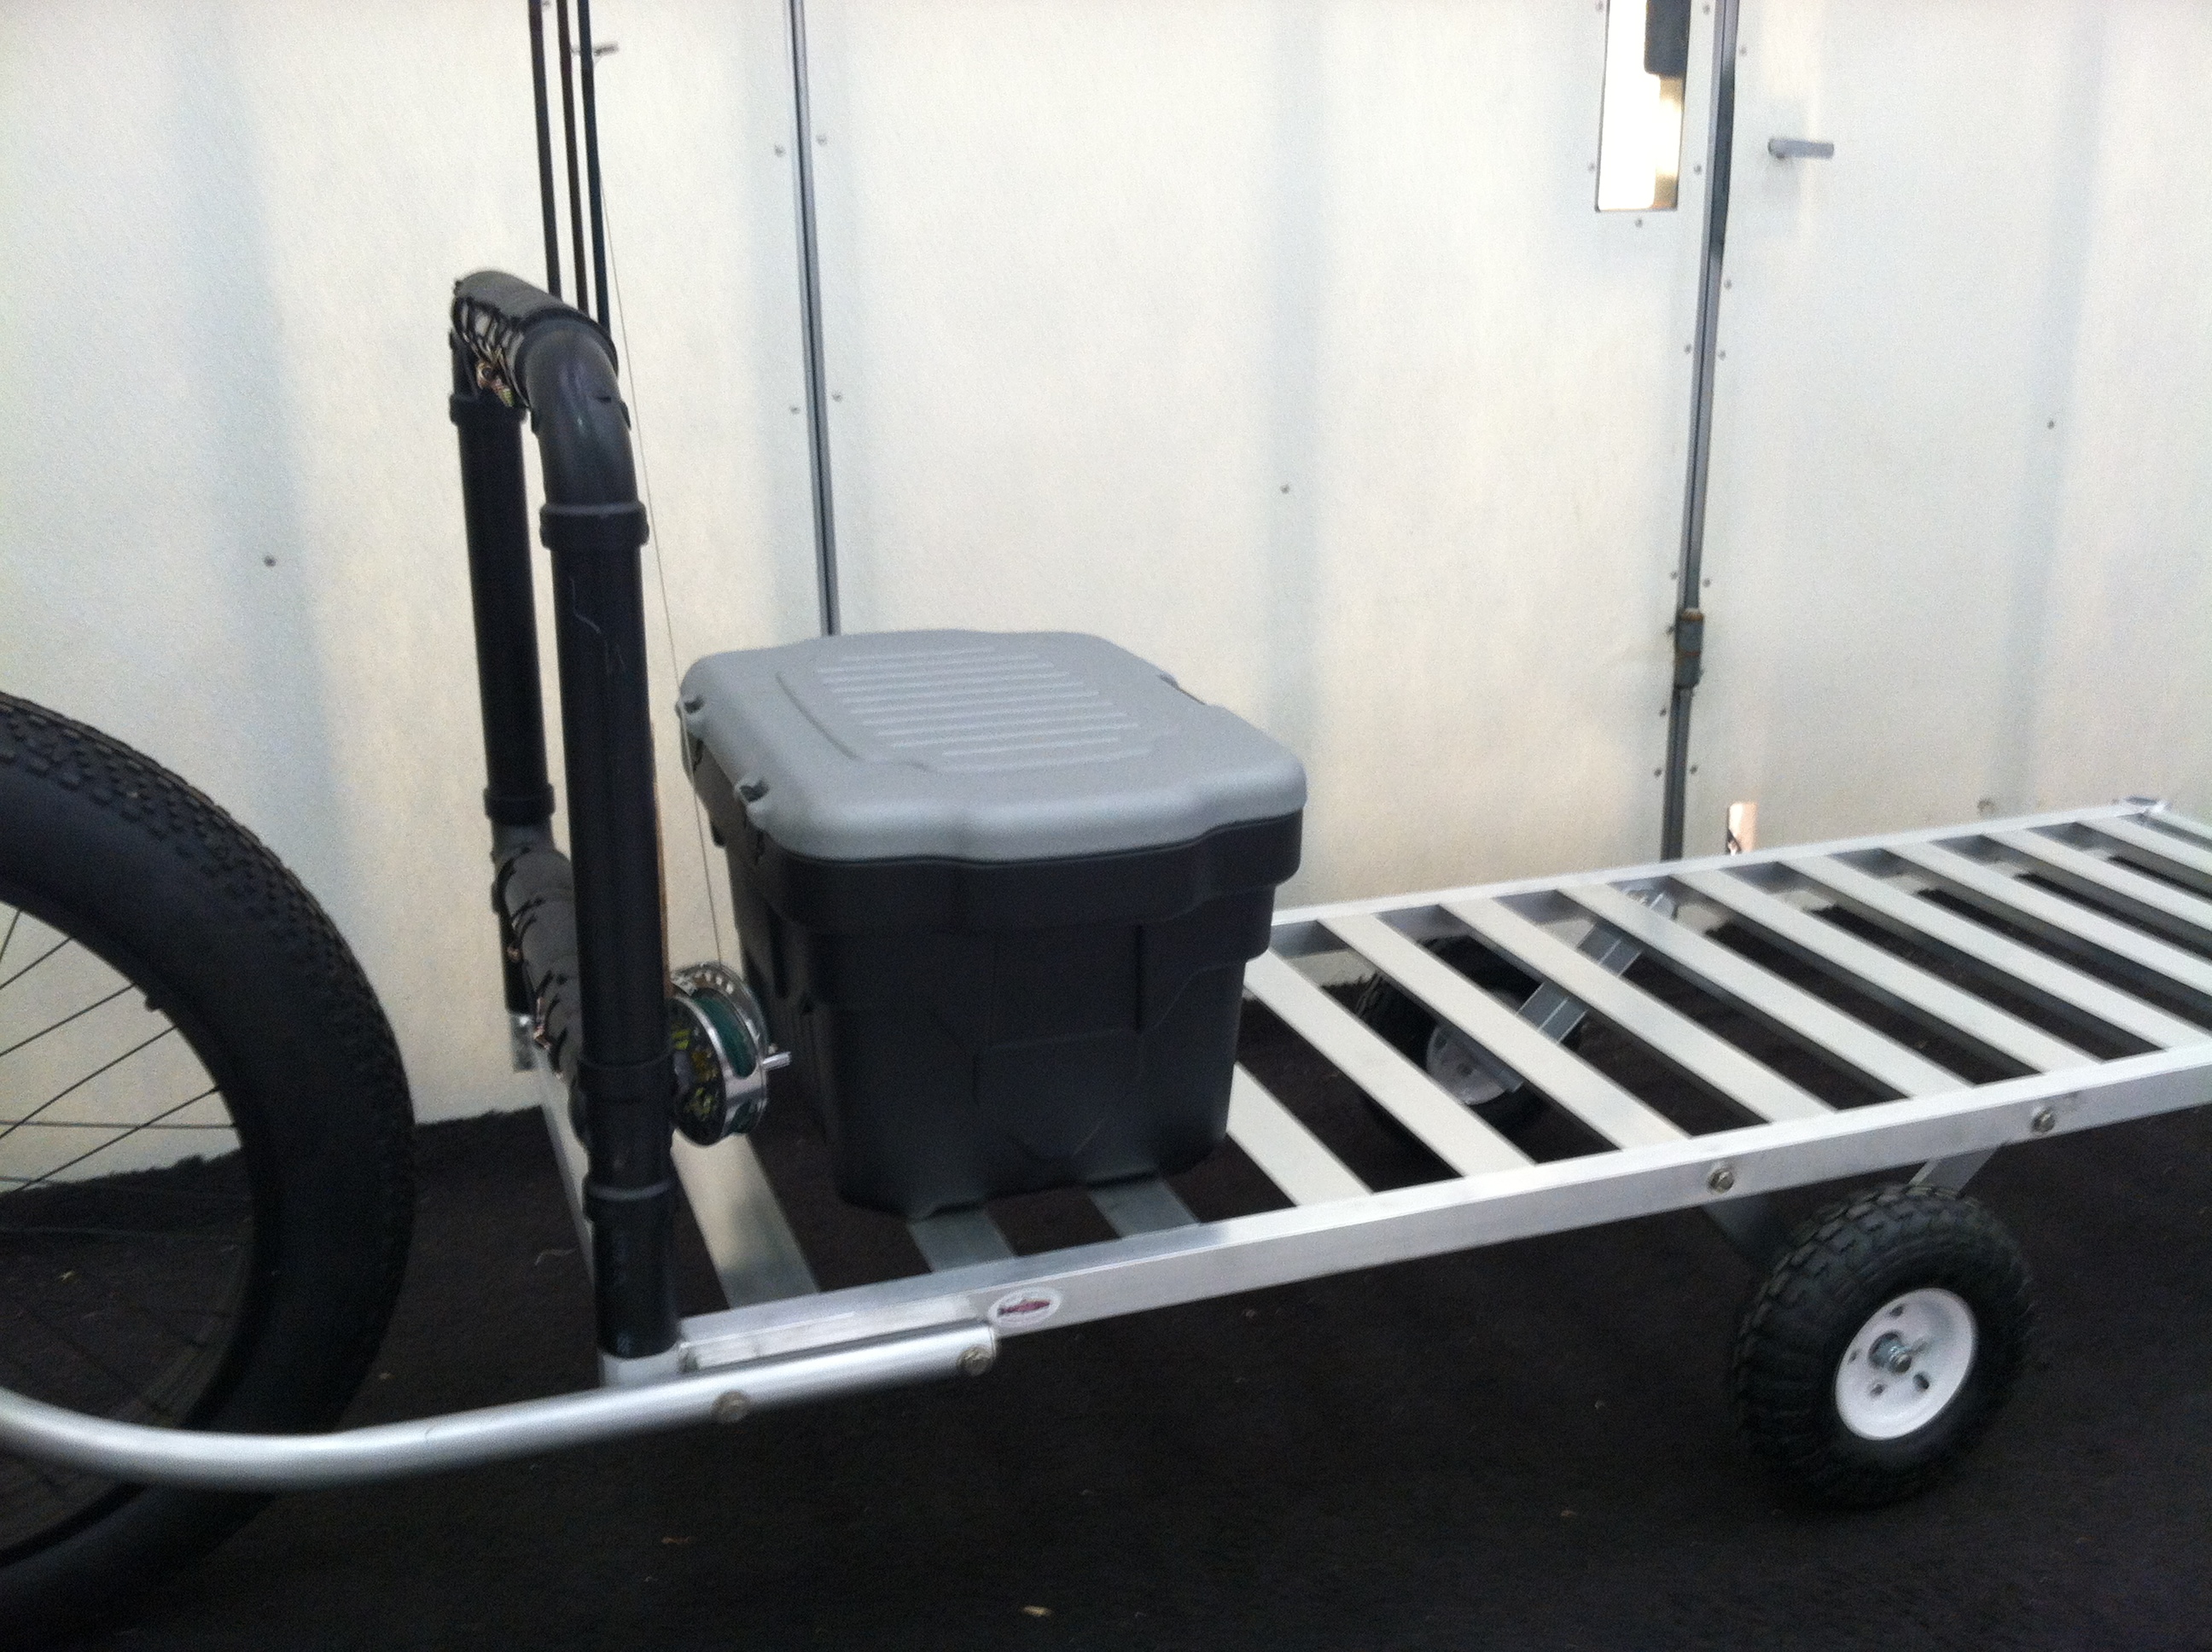 Heavy Duty Aluminum Flatbed Bike Trailer: Inside Cargo dims 56cmWx77cmL,  max Payload 125lbs - Comes with Easy-Install Steel Bike Hitch